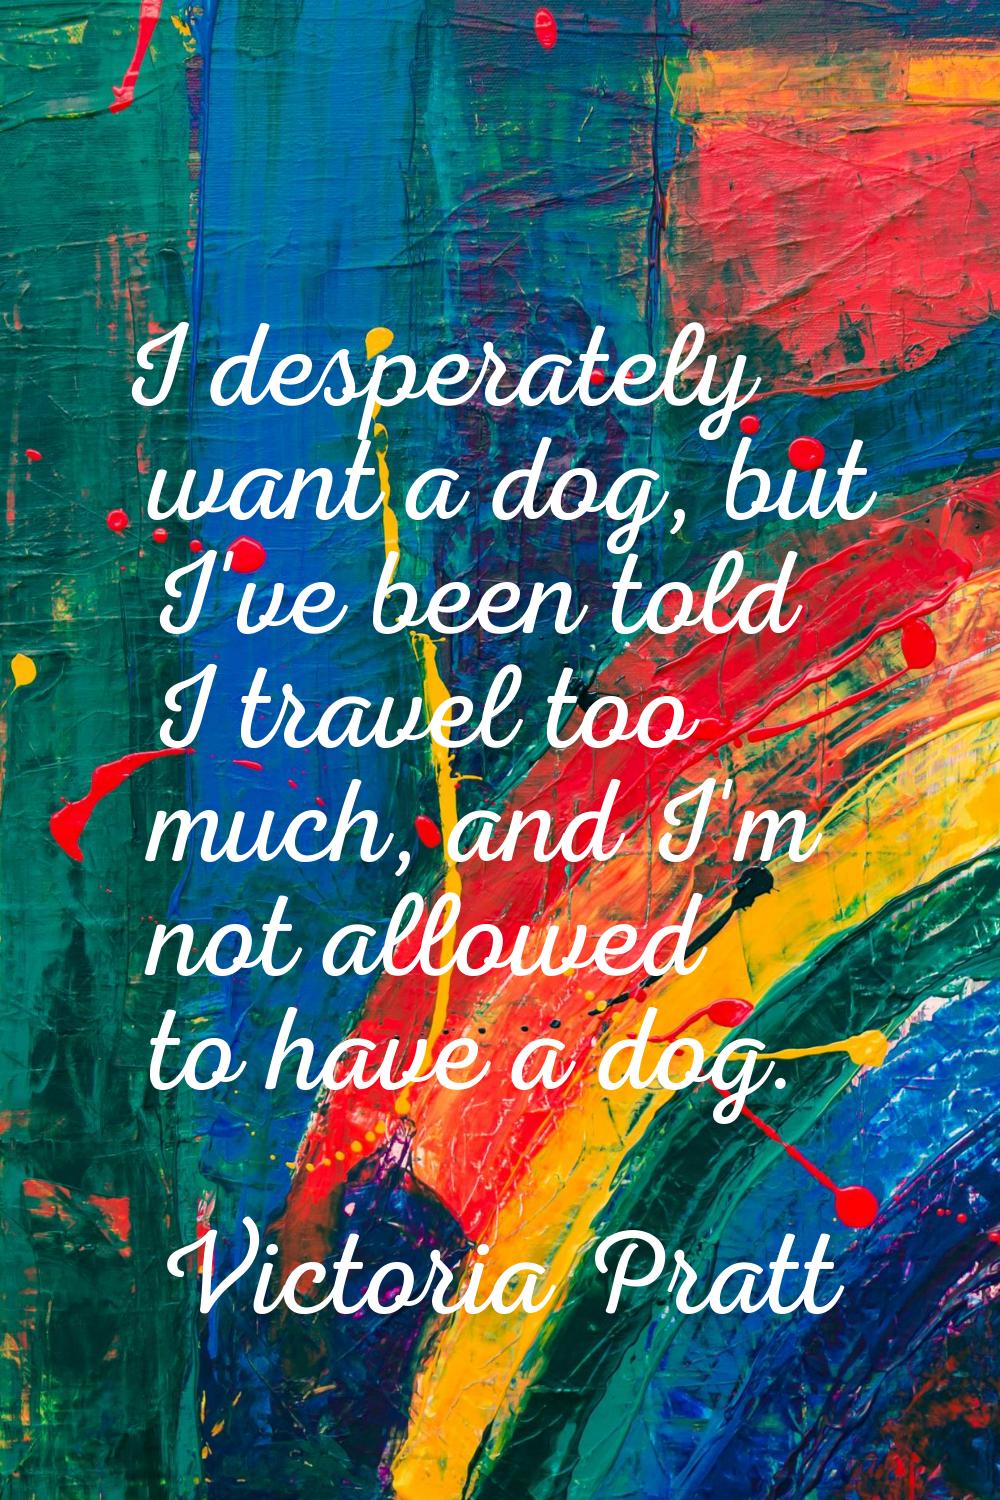 I desperately want a dog, but I've been told I travel too much, and I'm not allowed to have a dog.